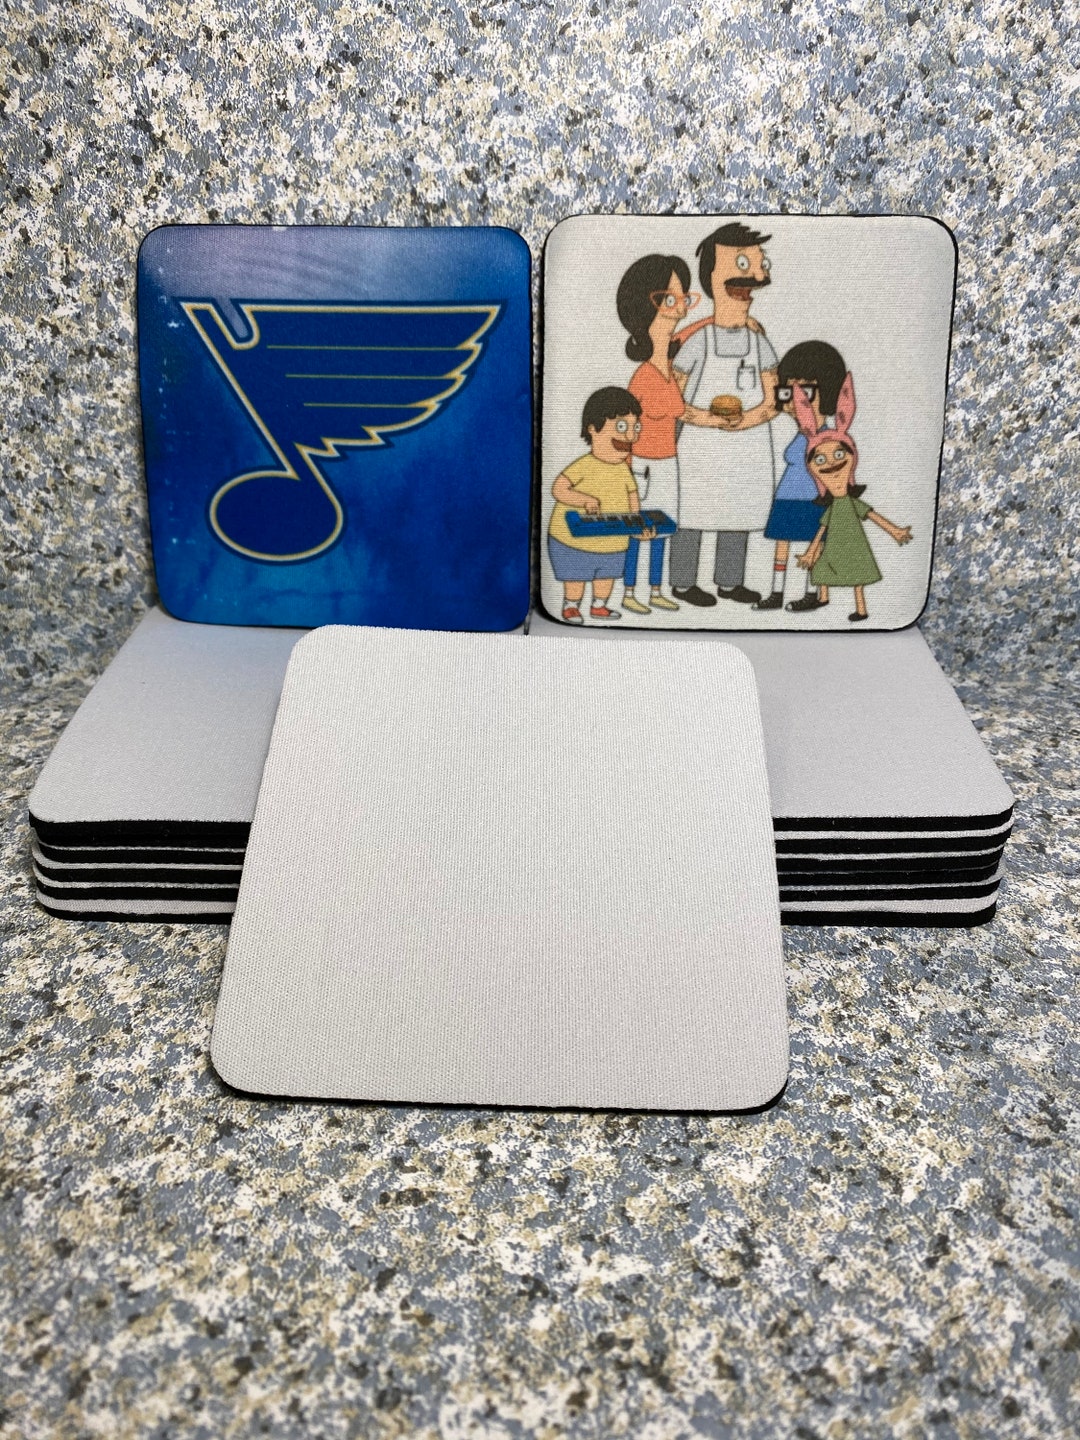 Car Coasters Sublimation BLANKS, Sublimation Blanks Coasters, Neoprene Car  Coasters Blanks, Sublimation Supplies 